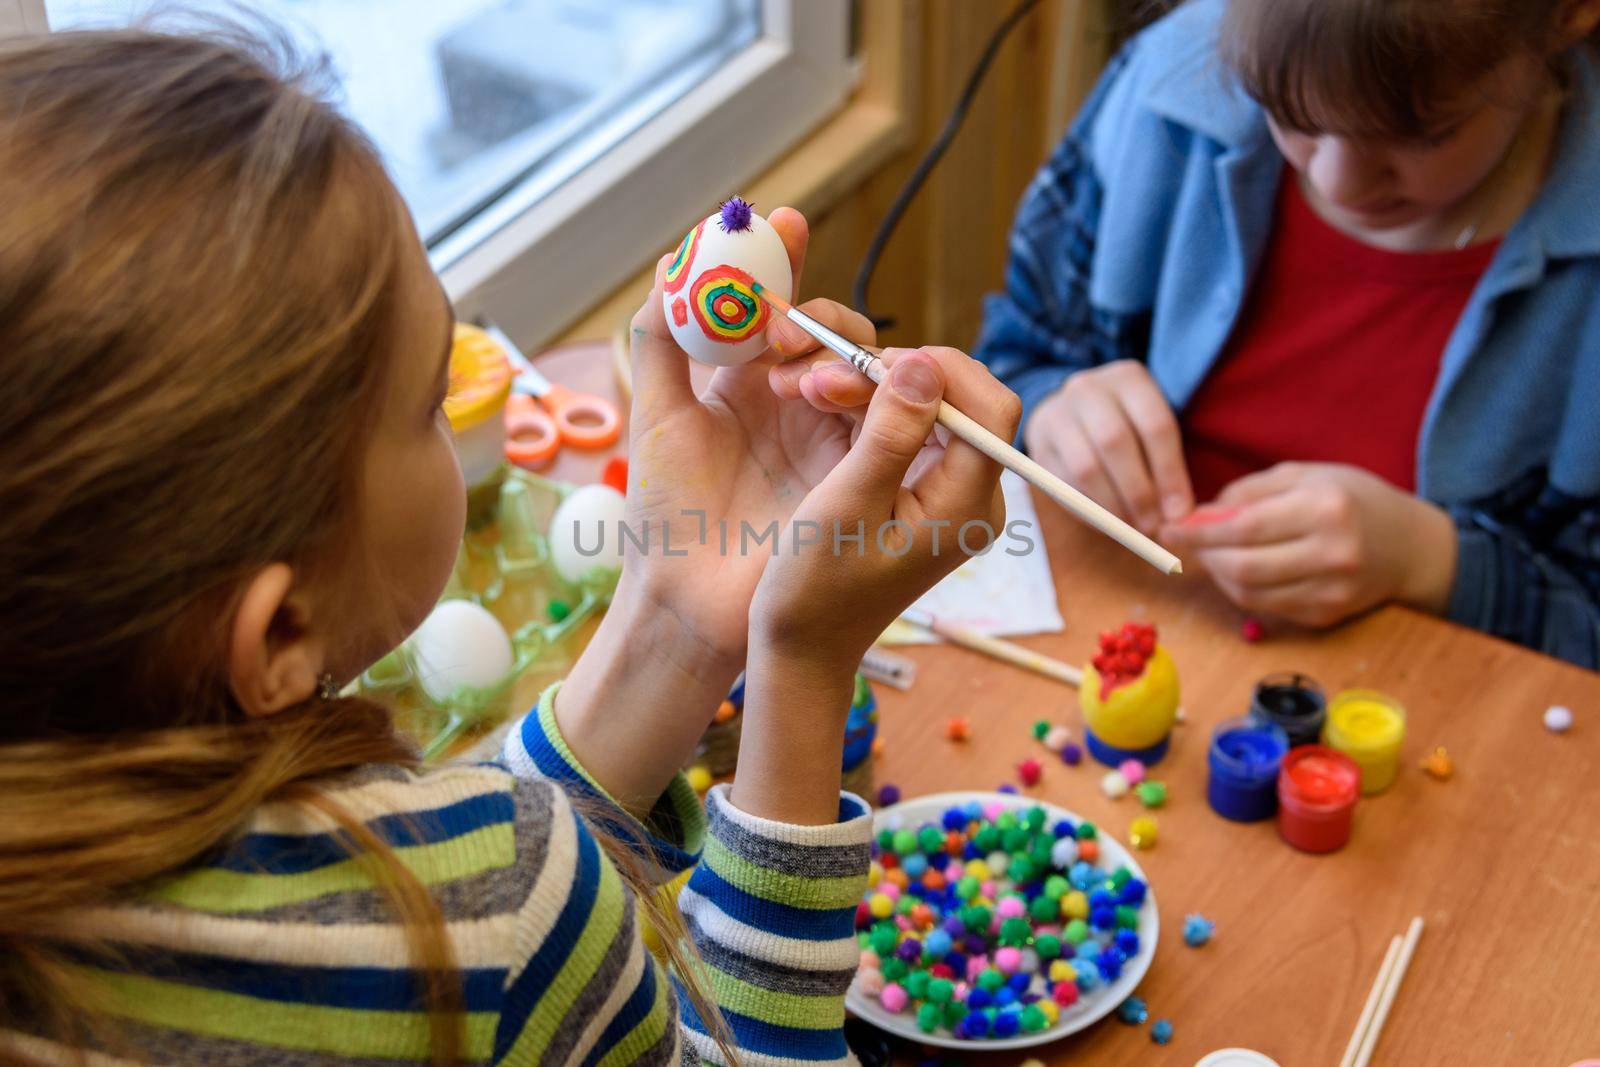 Children at the table are painting Easter eggs for the holiday